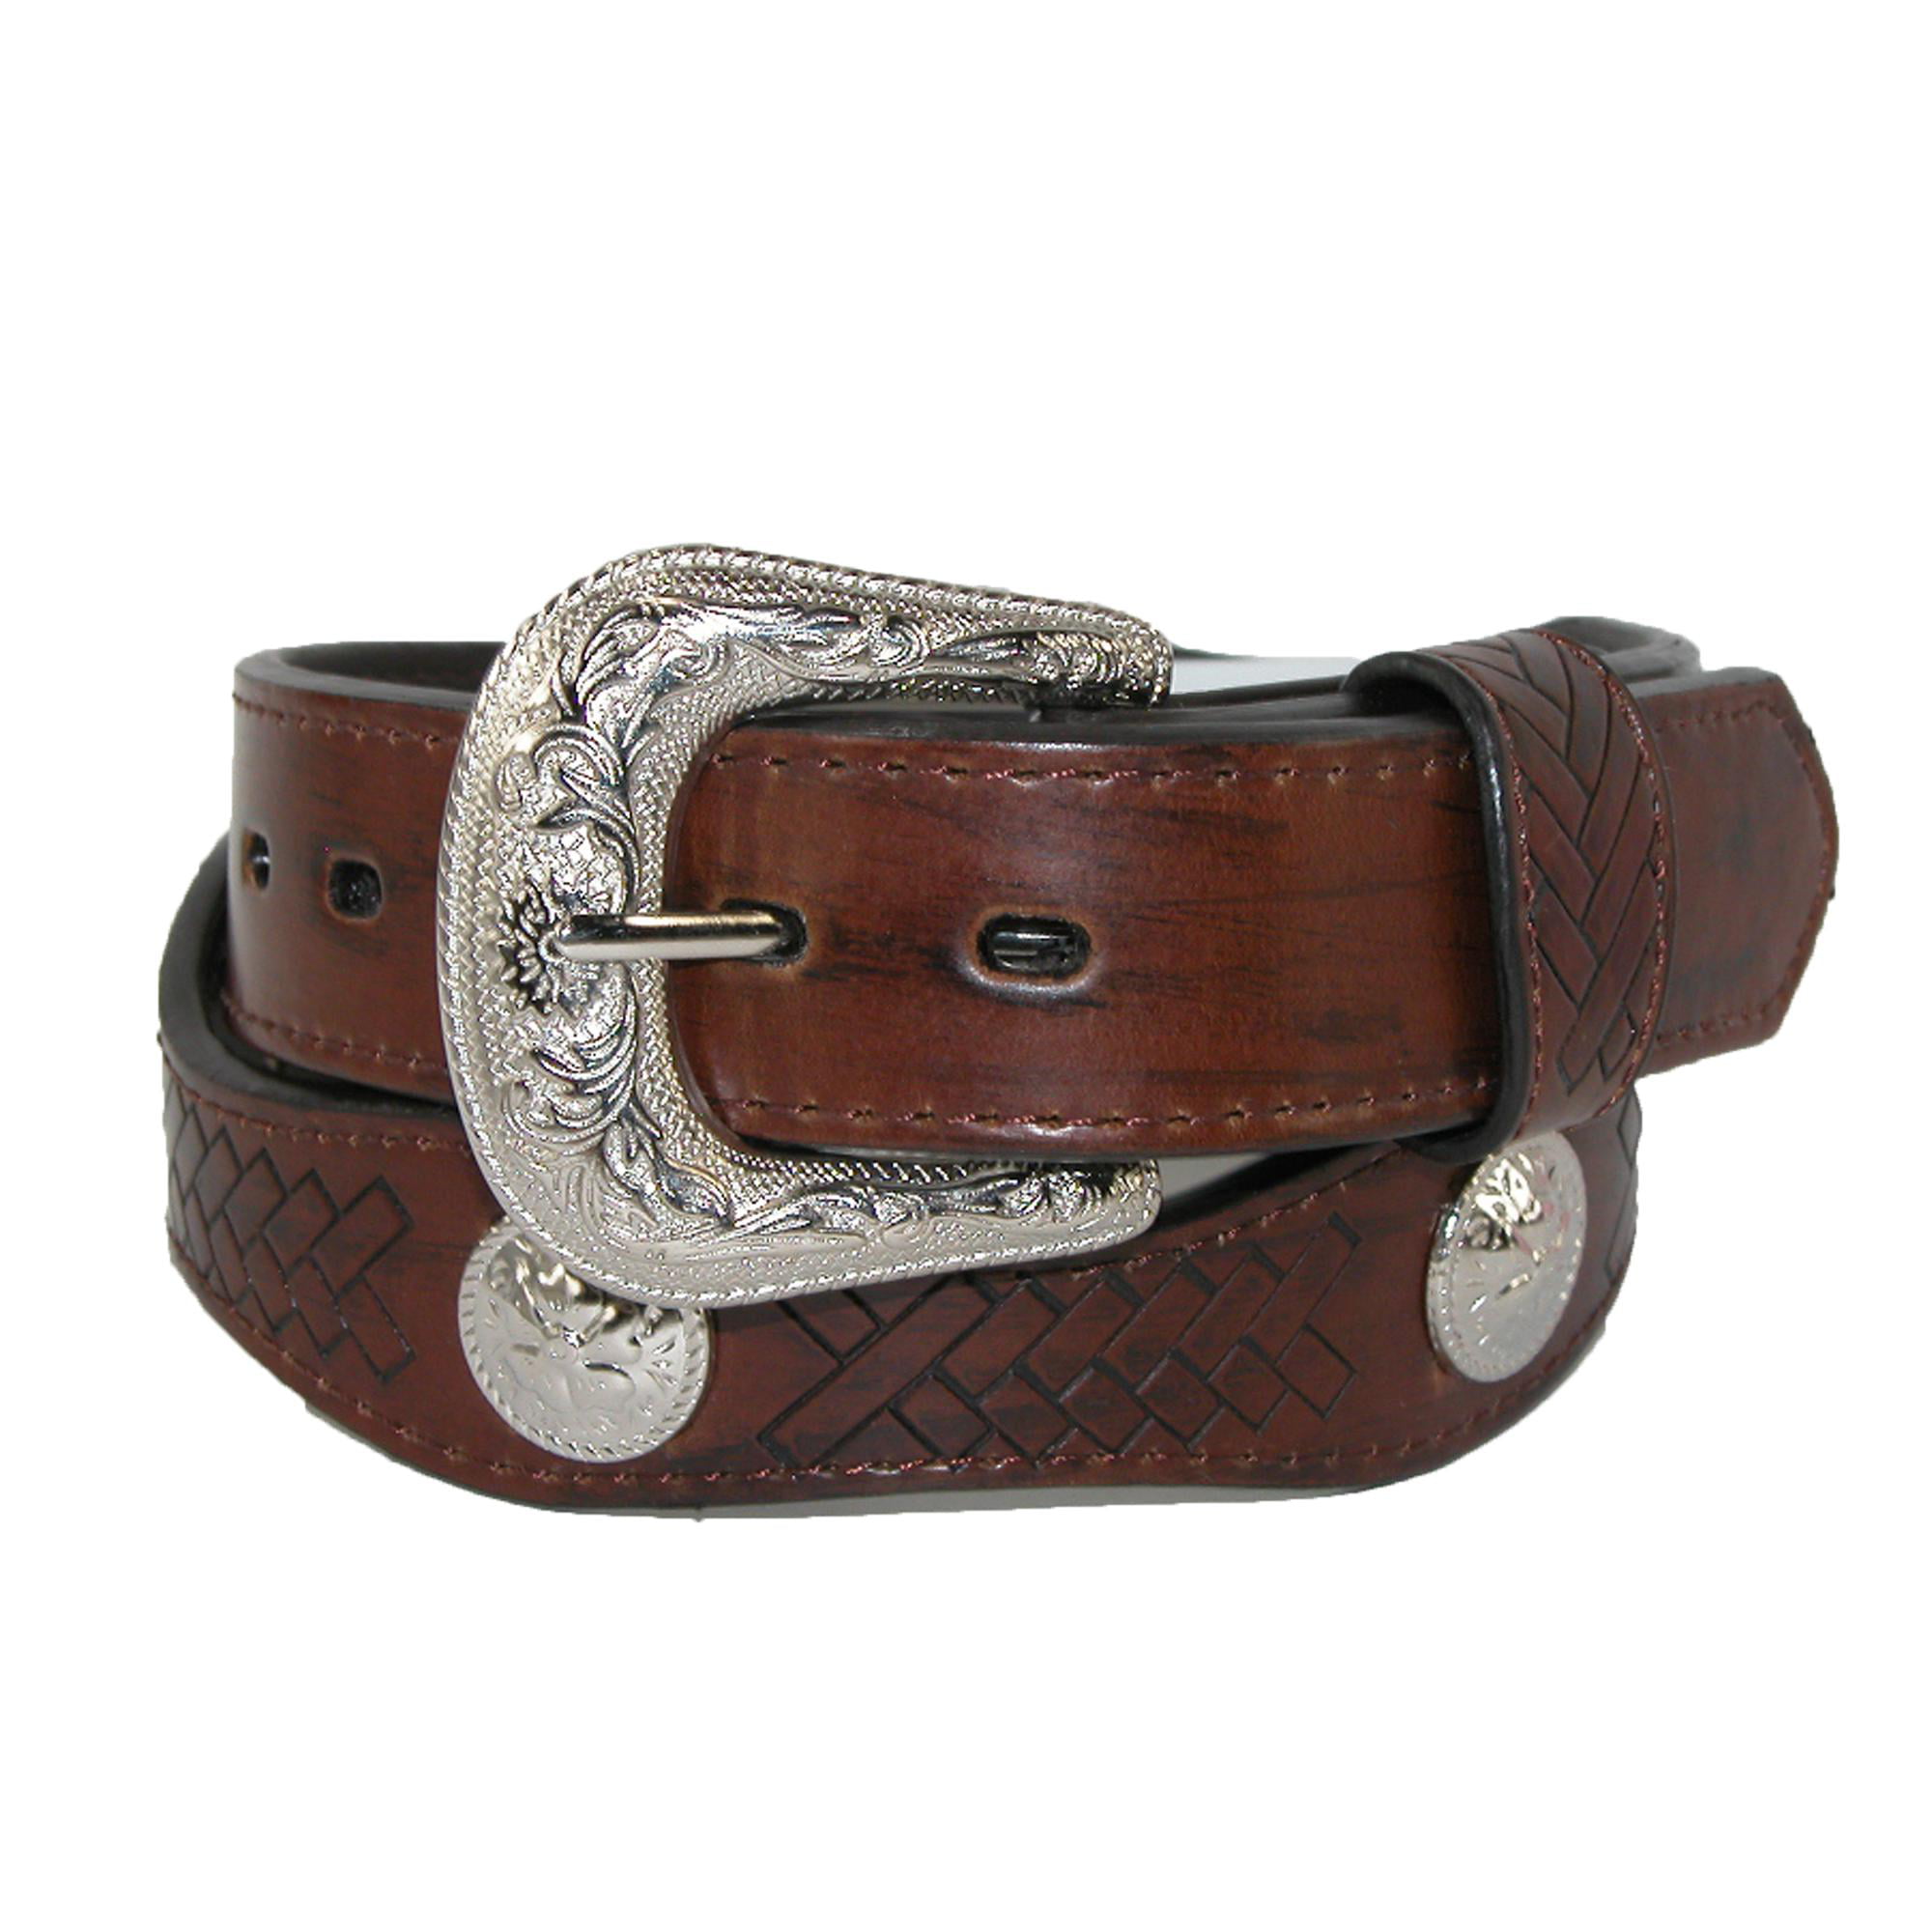 Rogers-Whitley Kids' Western Belt with Conchos | Walmart Canada